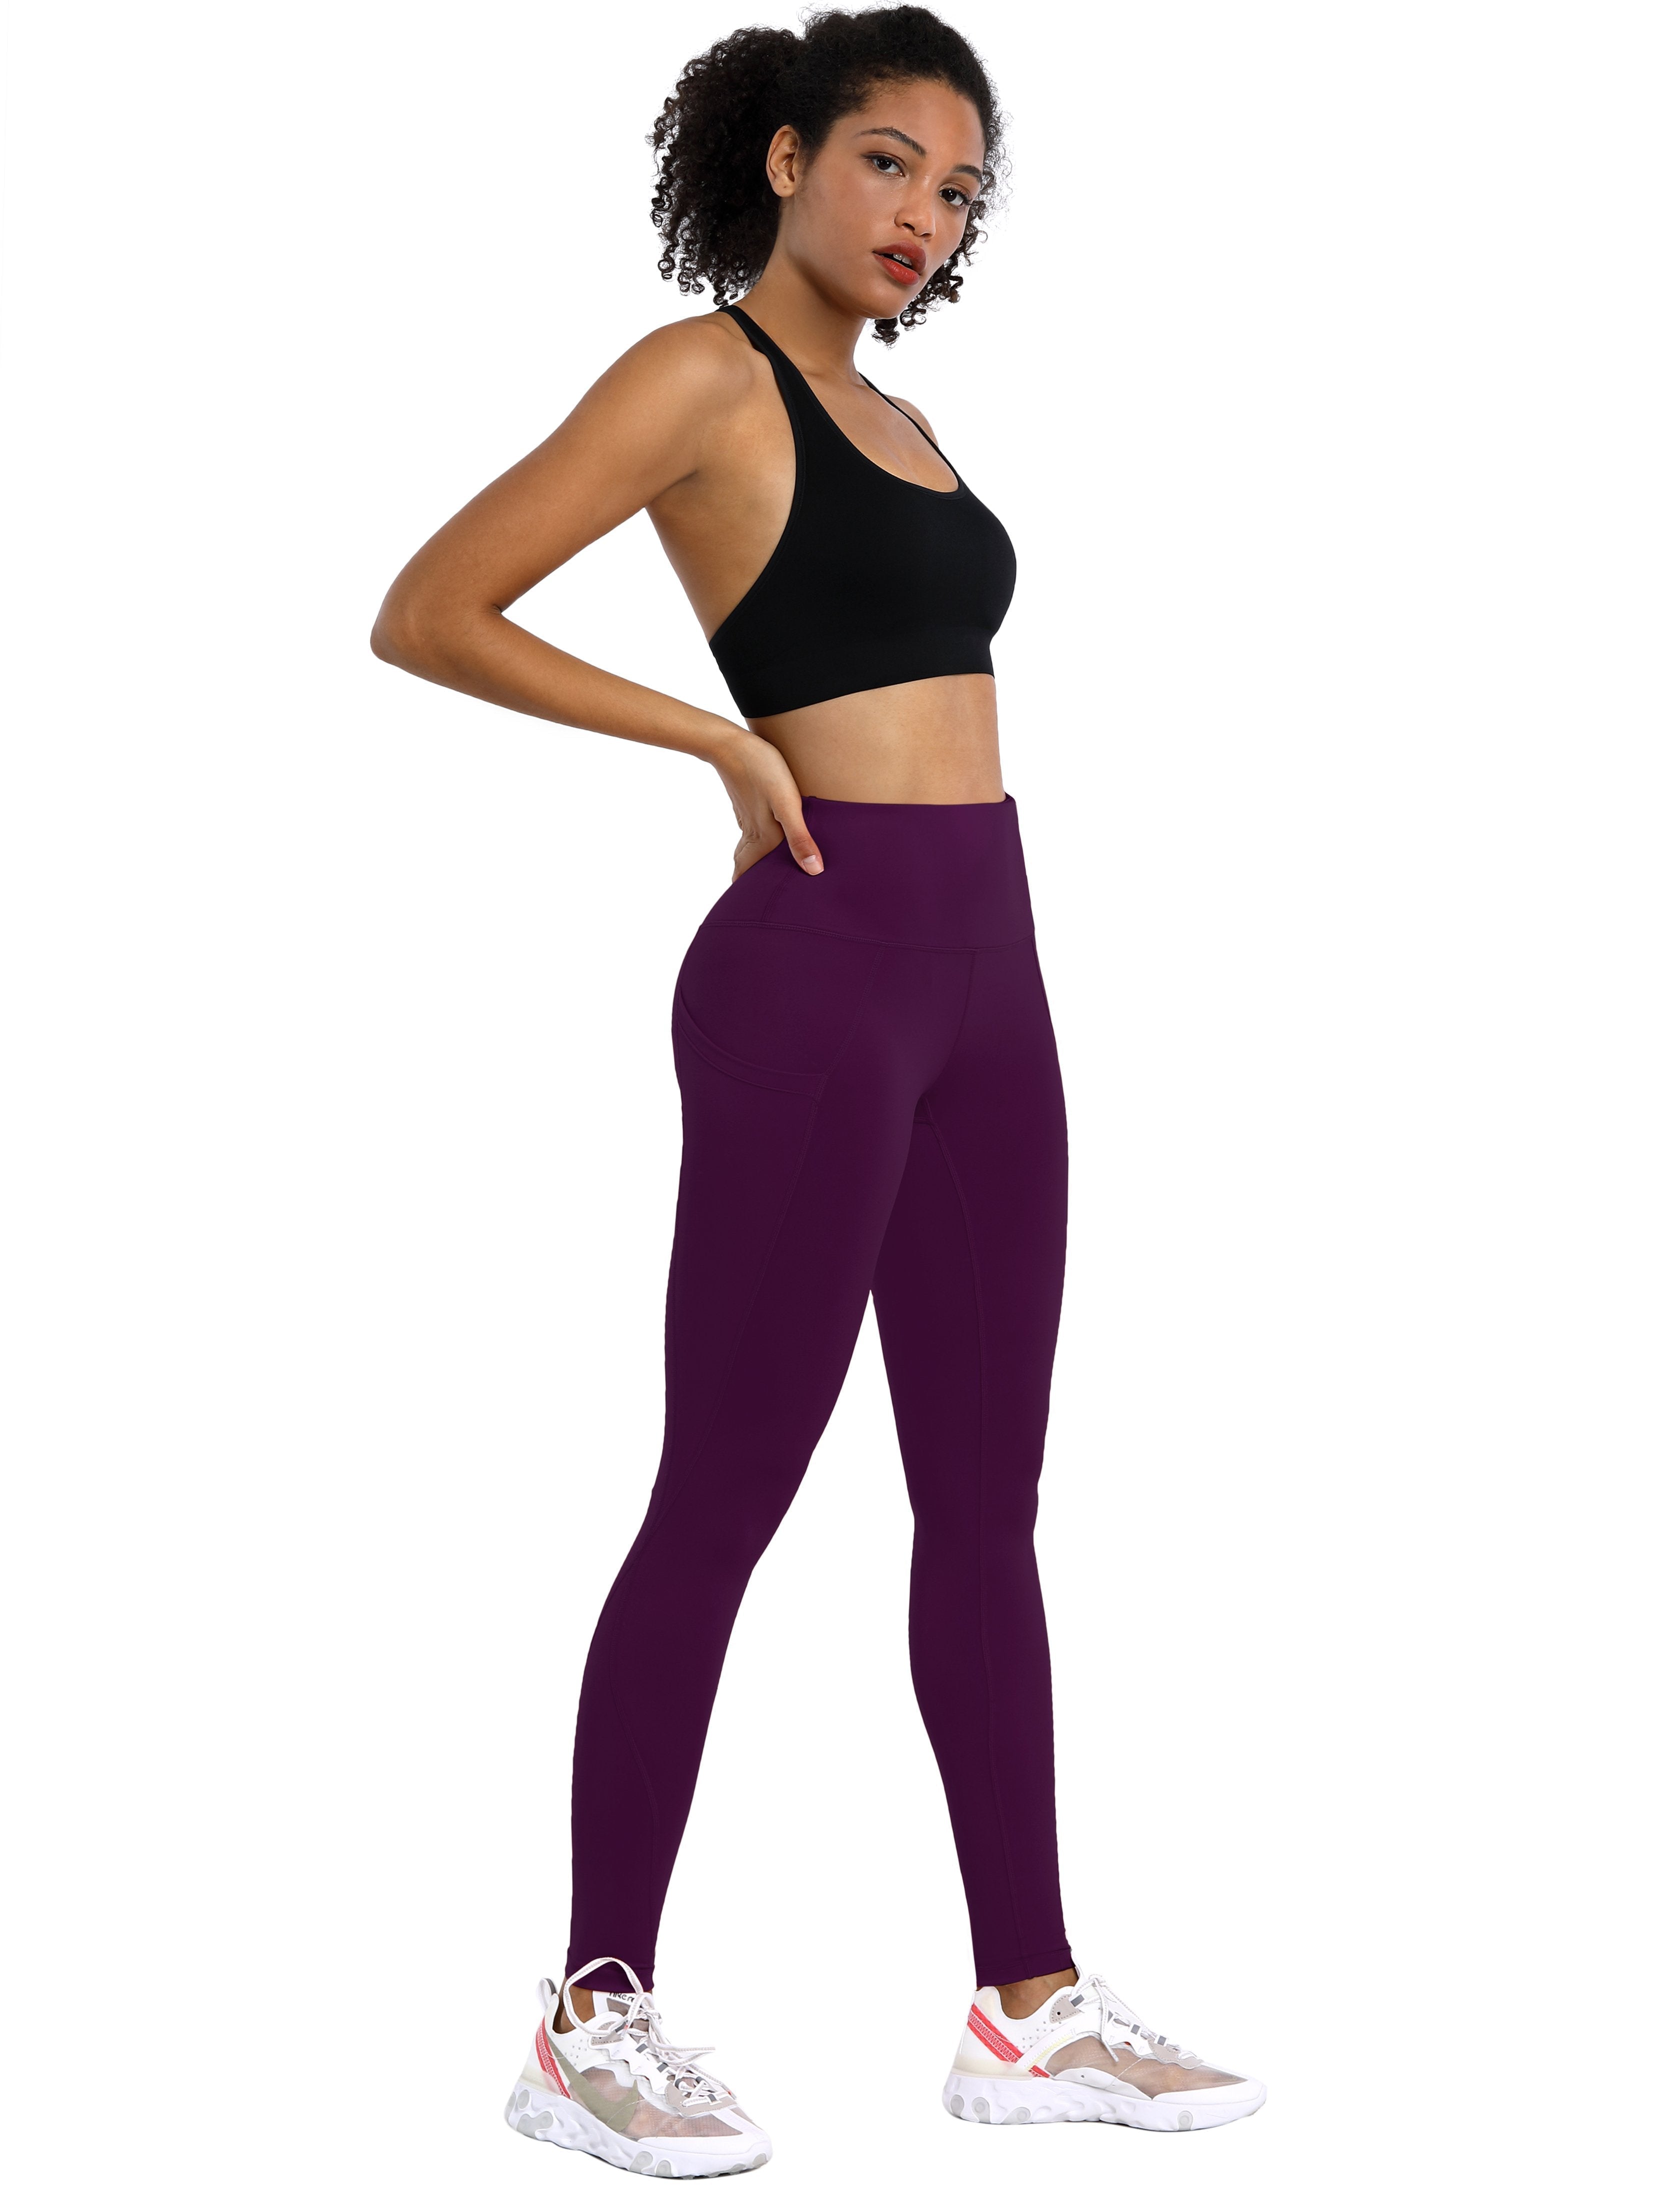 High Waist Side Pockets yogastudio Pants plum 75% Nylon, 25% Spandex Fabric doesn't attract lint easily 4-way stretch No see-through Moisture-wicking Tummy control Inner pocket